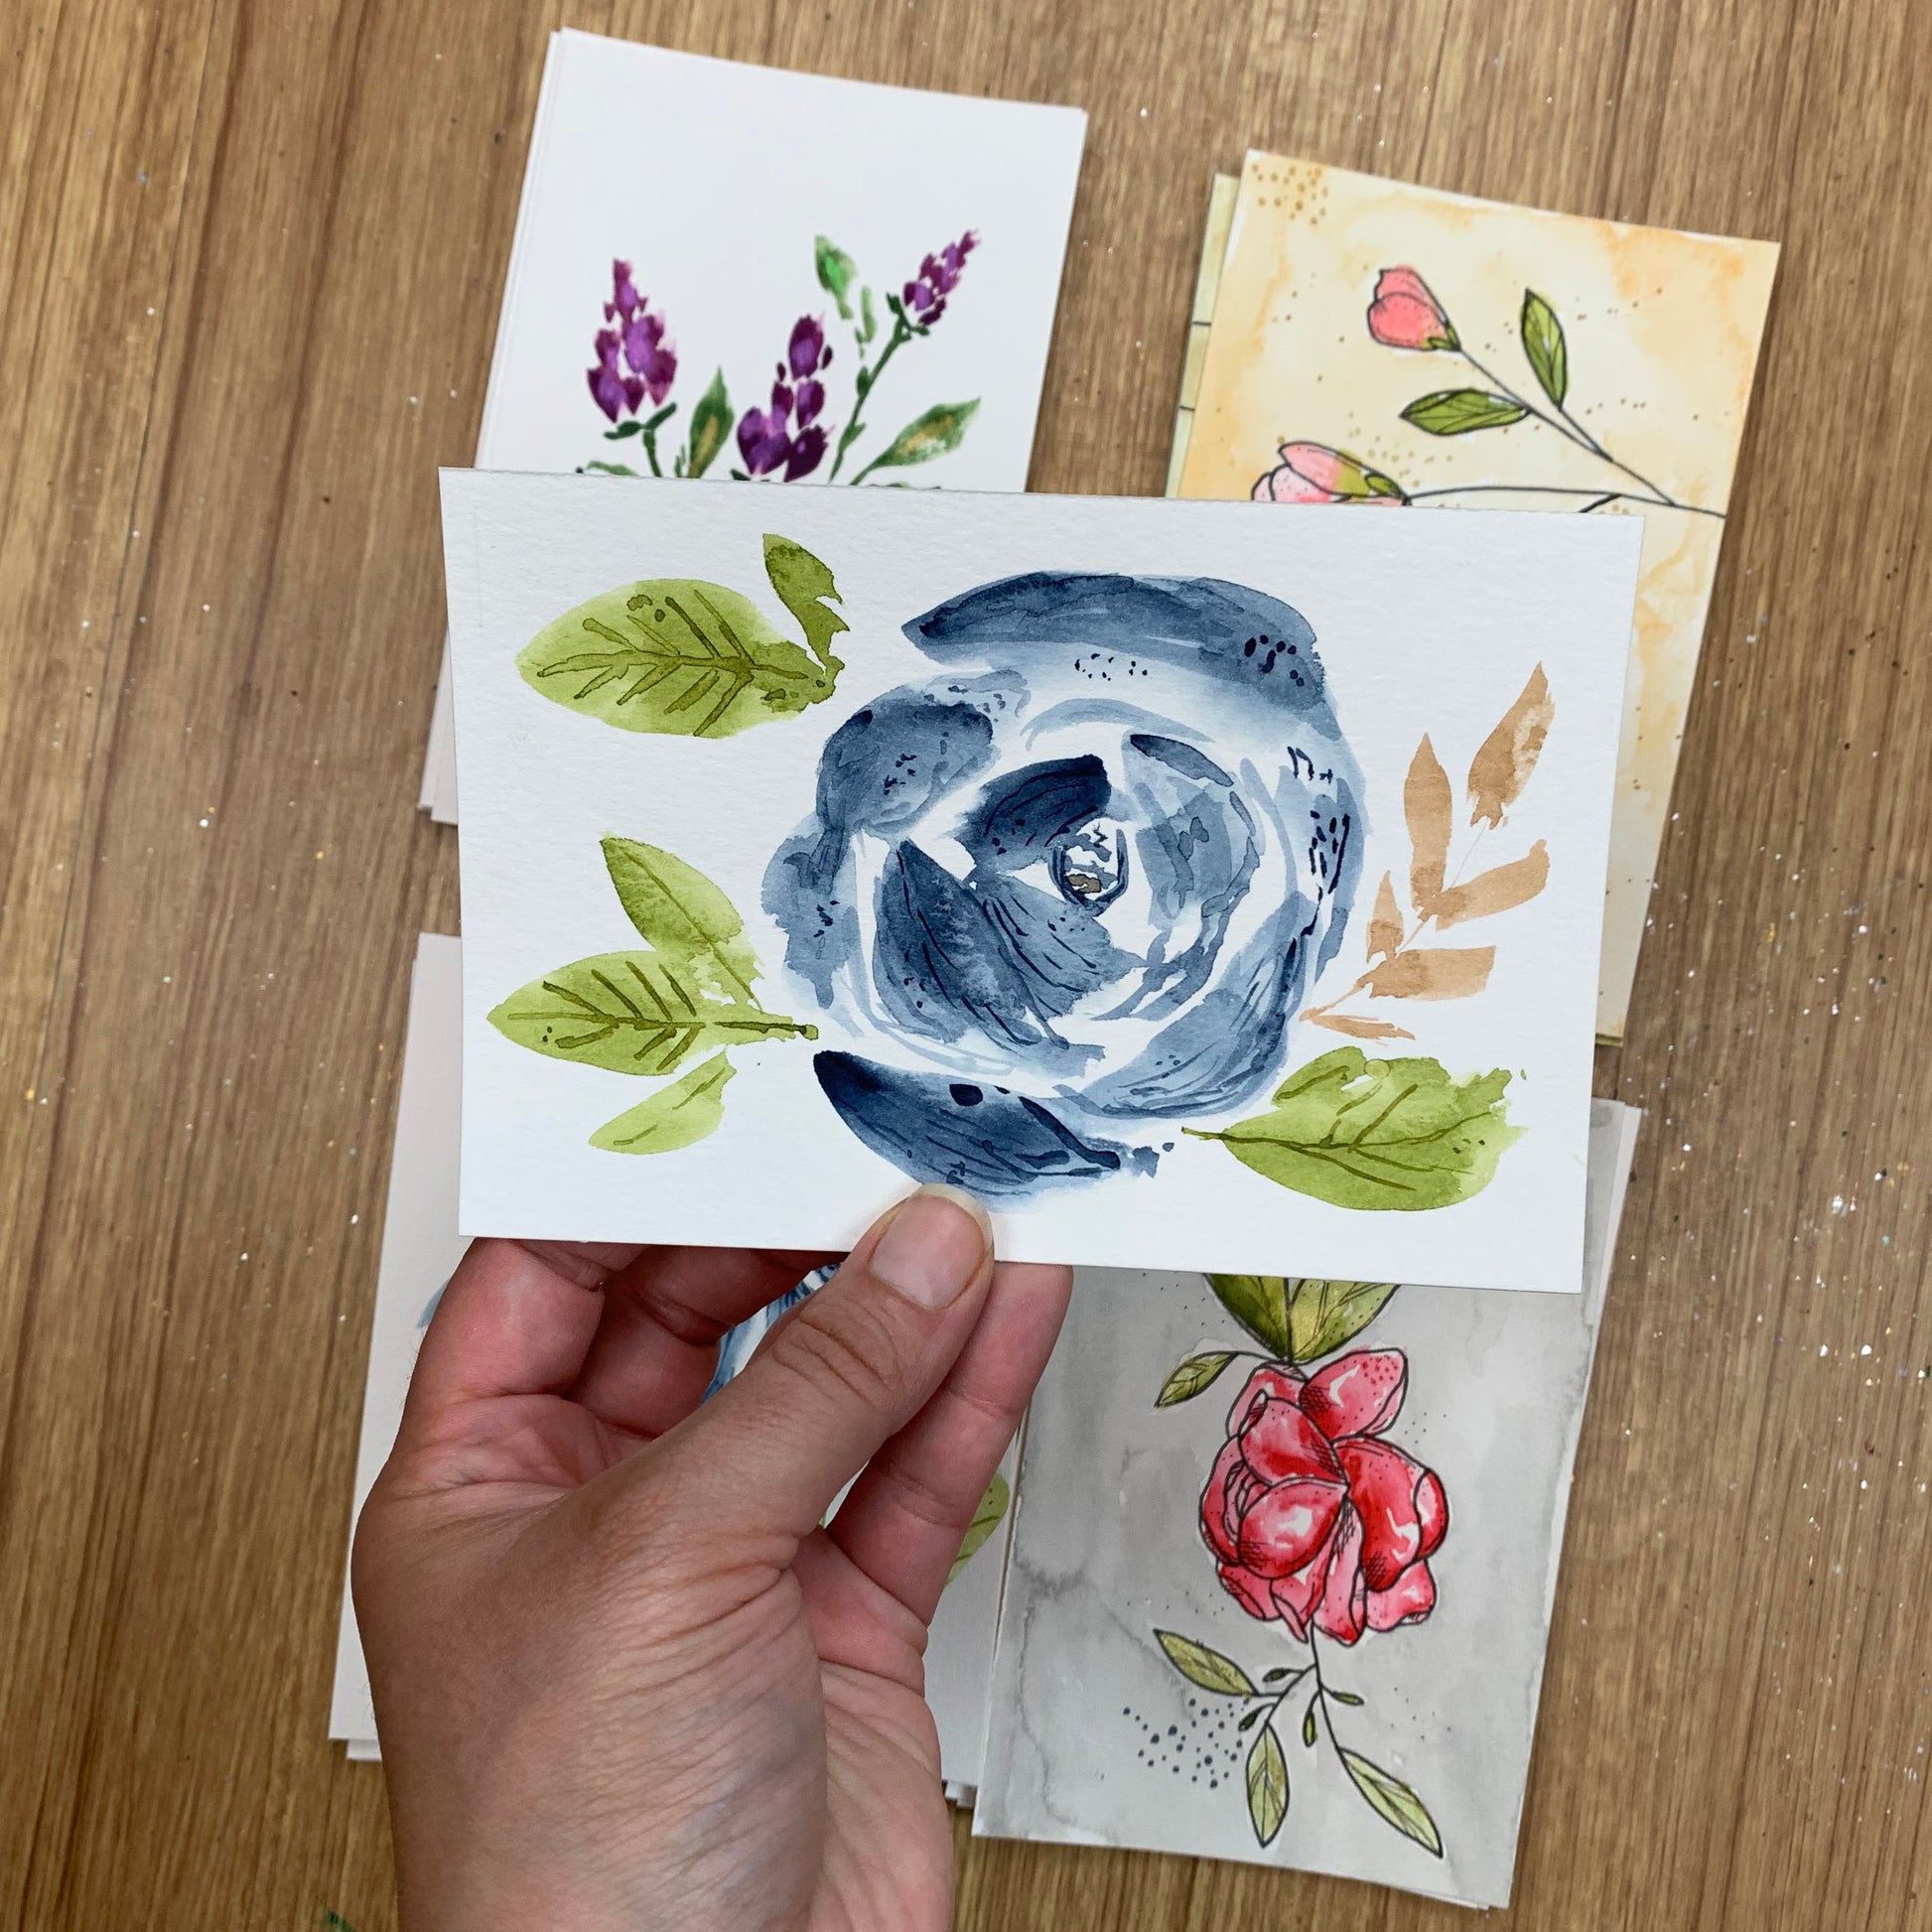 Original Loose Floral Watercolor Cards with Ink Details (Set of 3